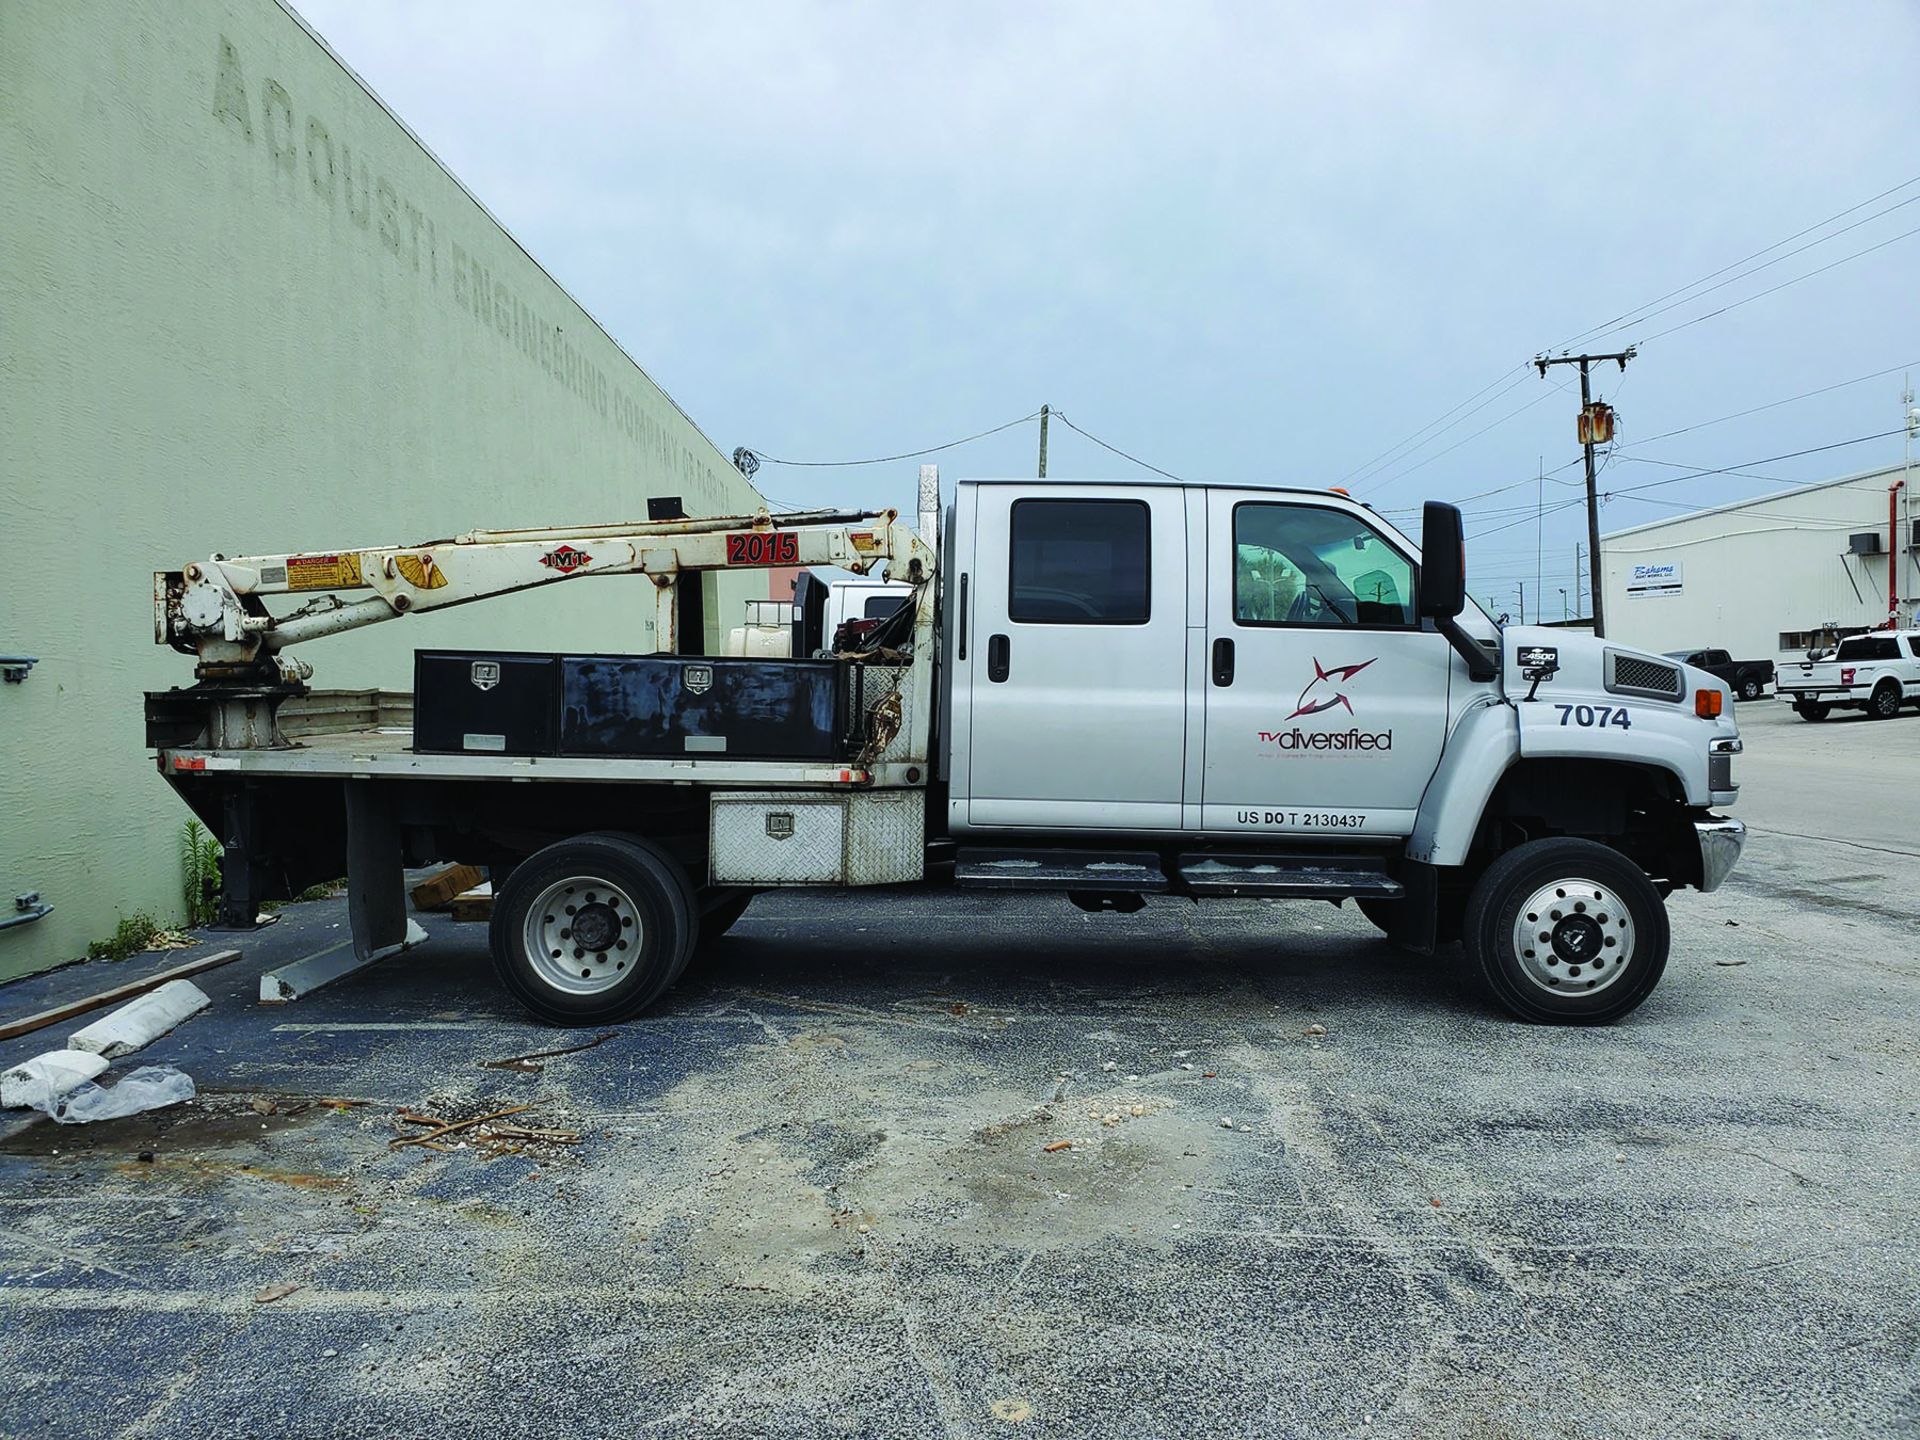 2006 CHEVROLET C4500 4X4 CREW CAB FLAT/STAKE BED TRUCK W/IMT 2015 TELESCOPING BOOM, 2.5 TON HOOK, - Image 7 of 19